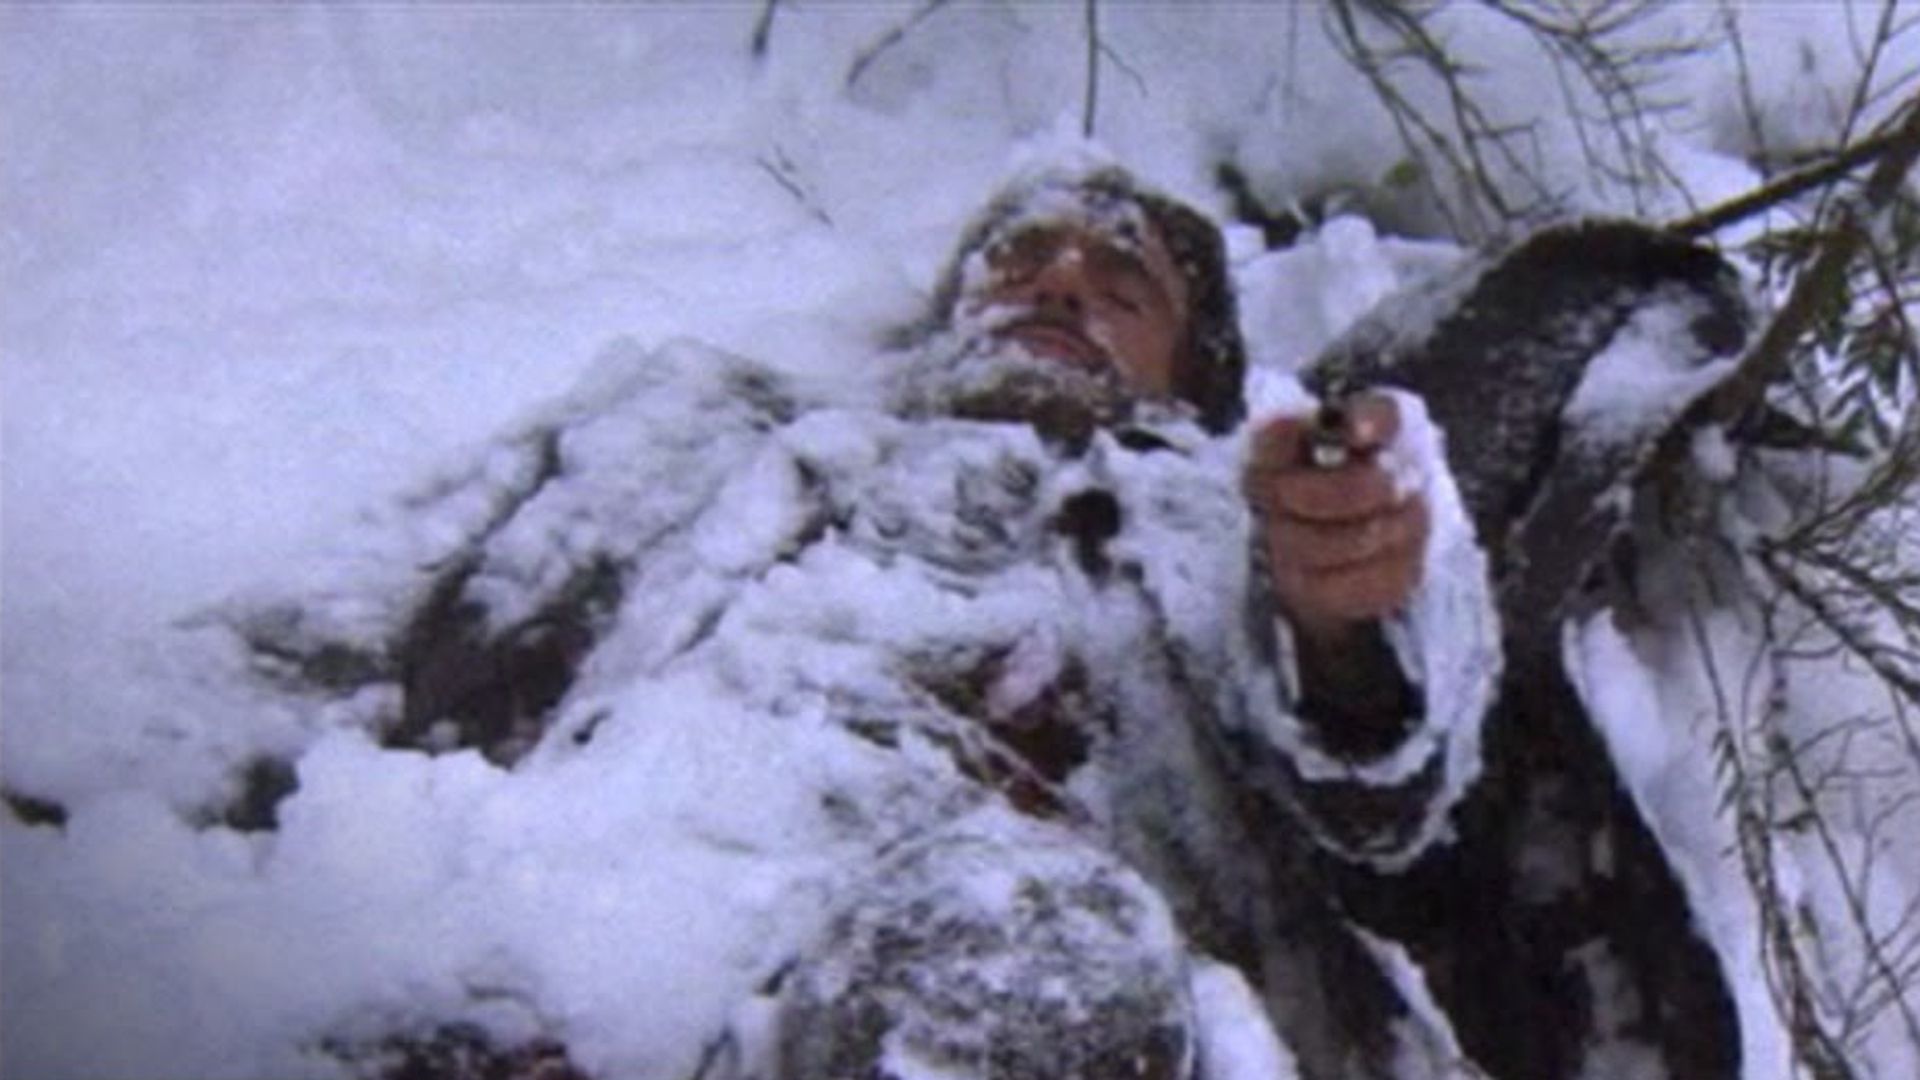 McCabe is buried in snow in McCabe & Mrs. Miller